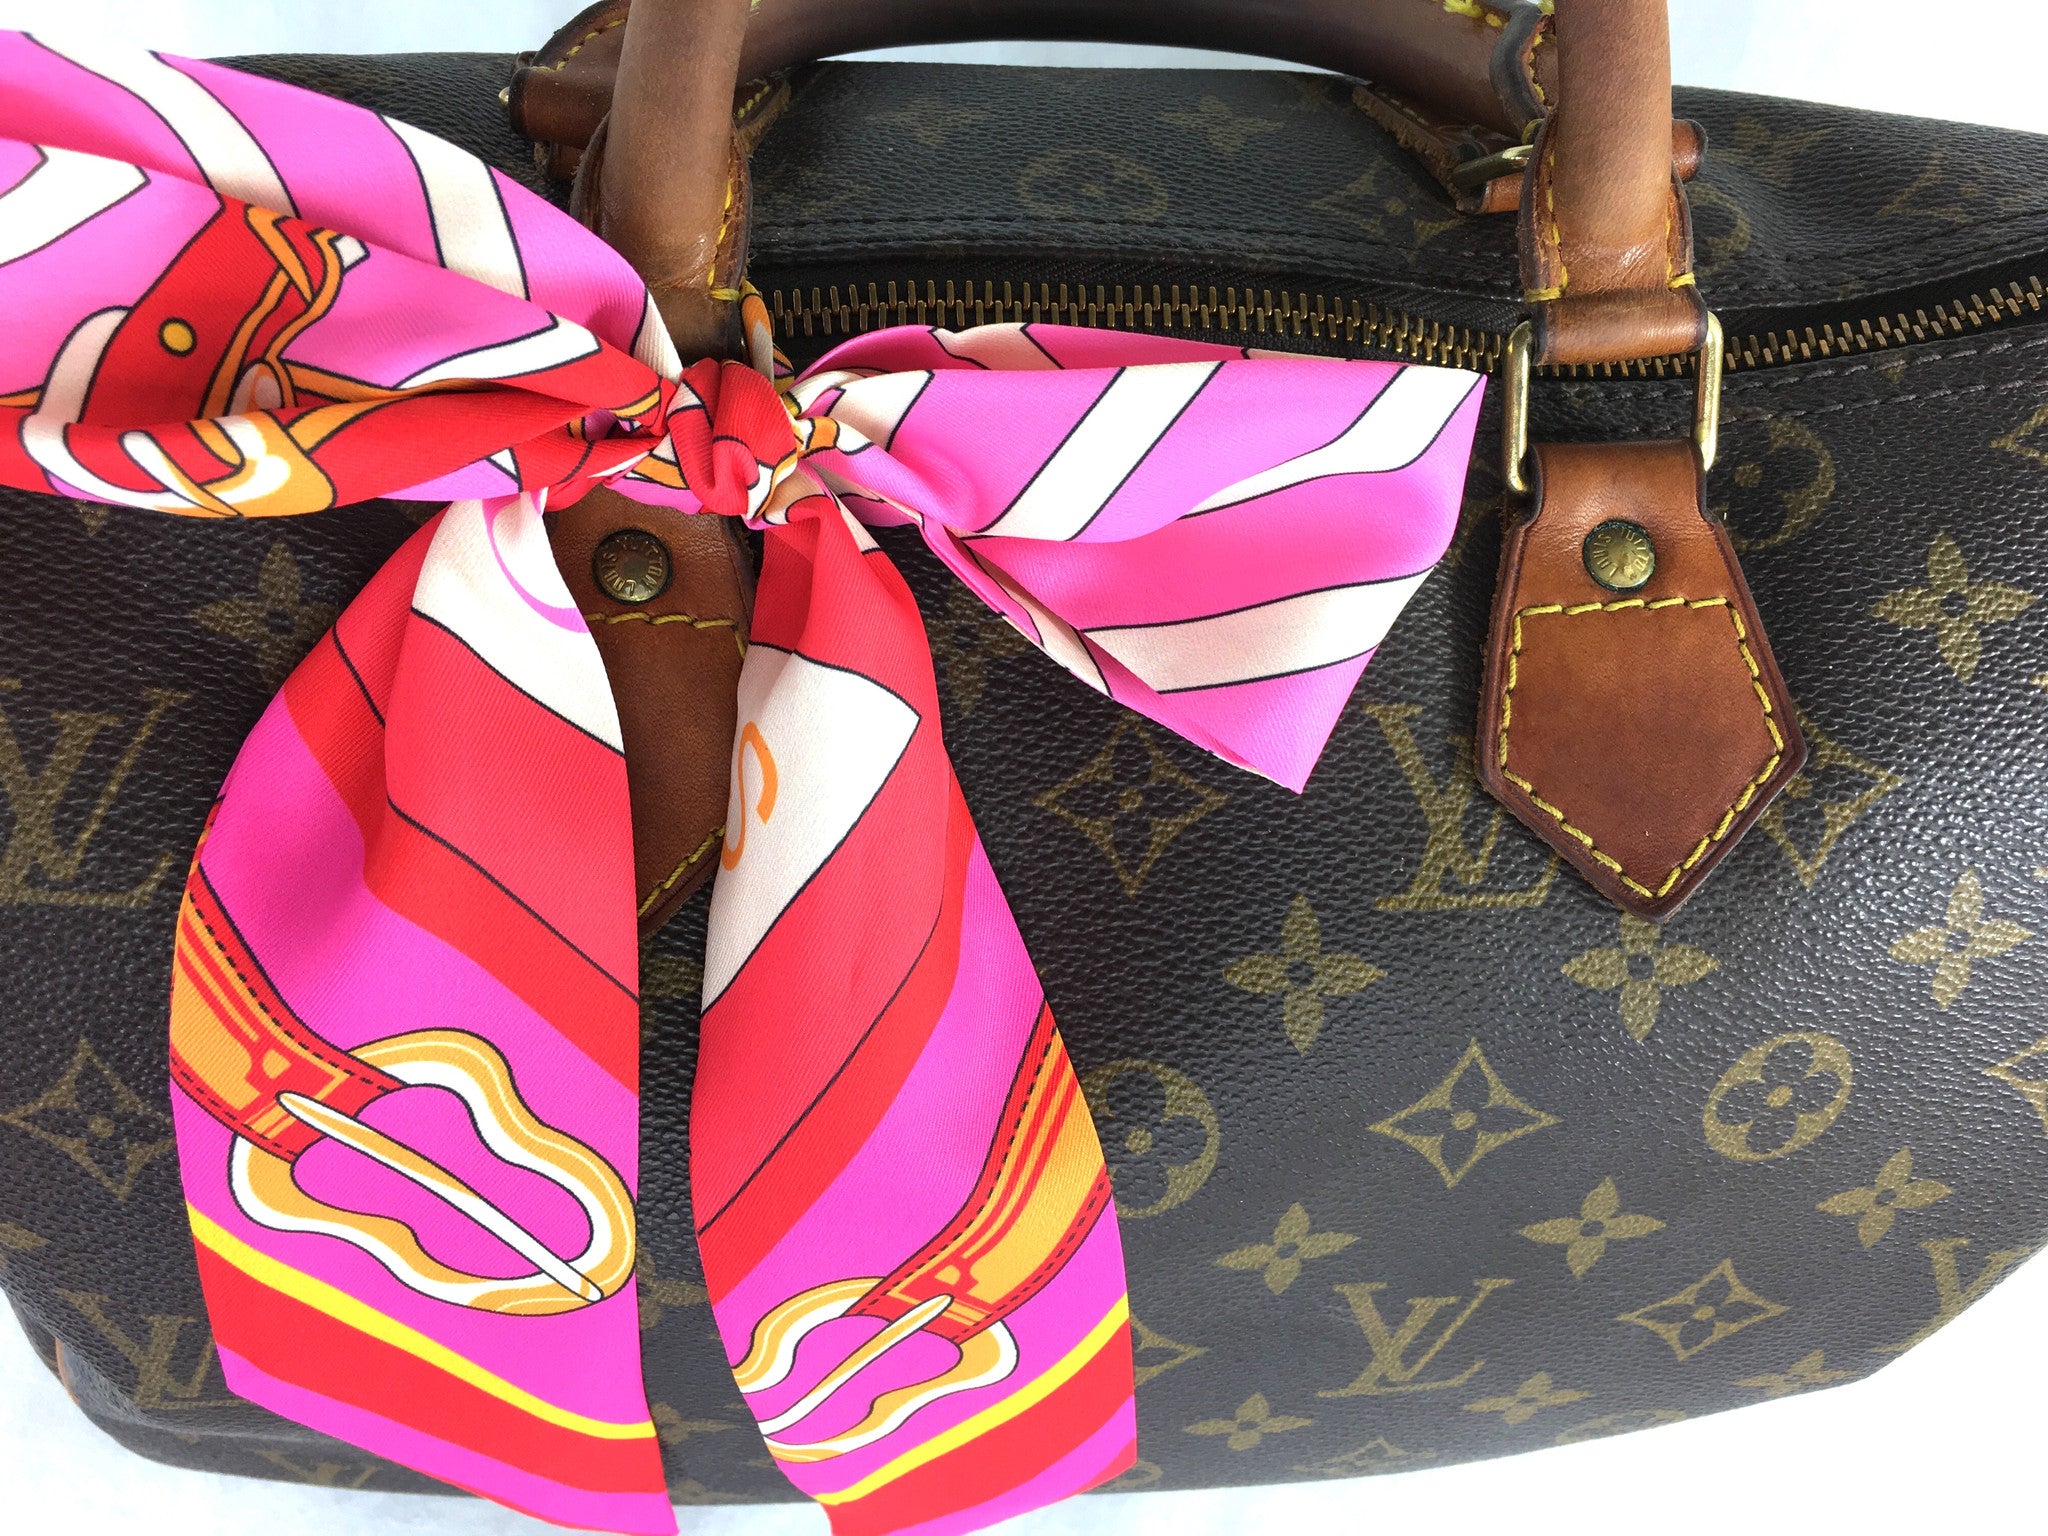 lv bag with scarf